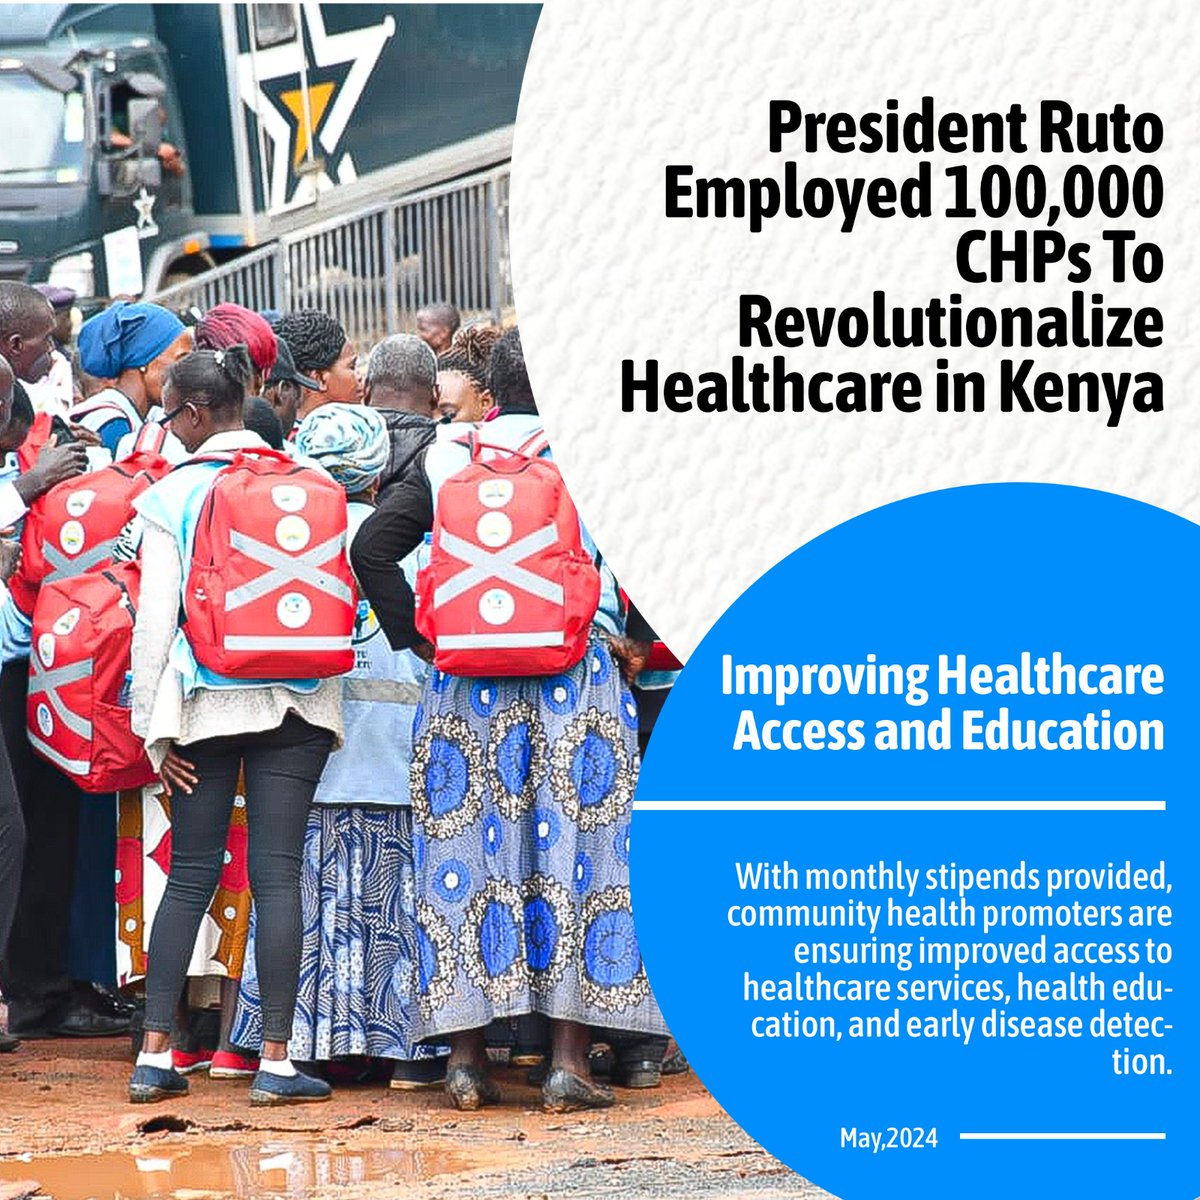 President William Ruto's Administration is aiming at improving healthcare access and education.
#RutoHealthcareInitiative

#RutoEmpowers

Afya Nyumbani